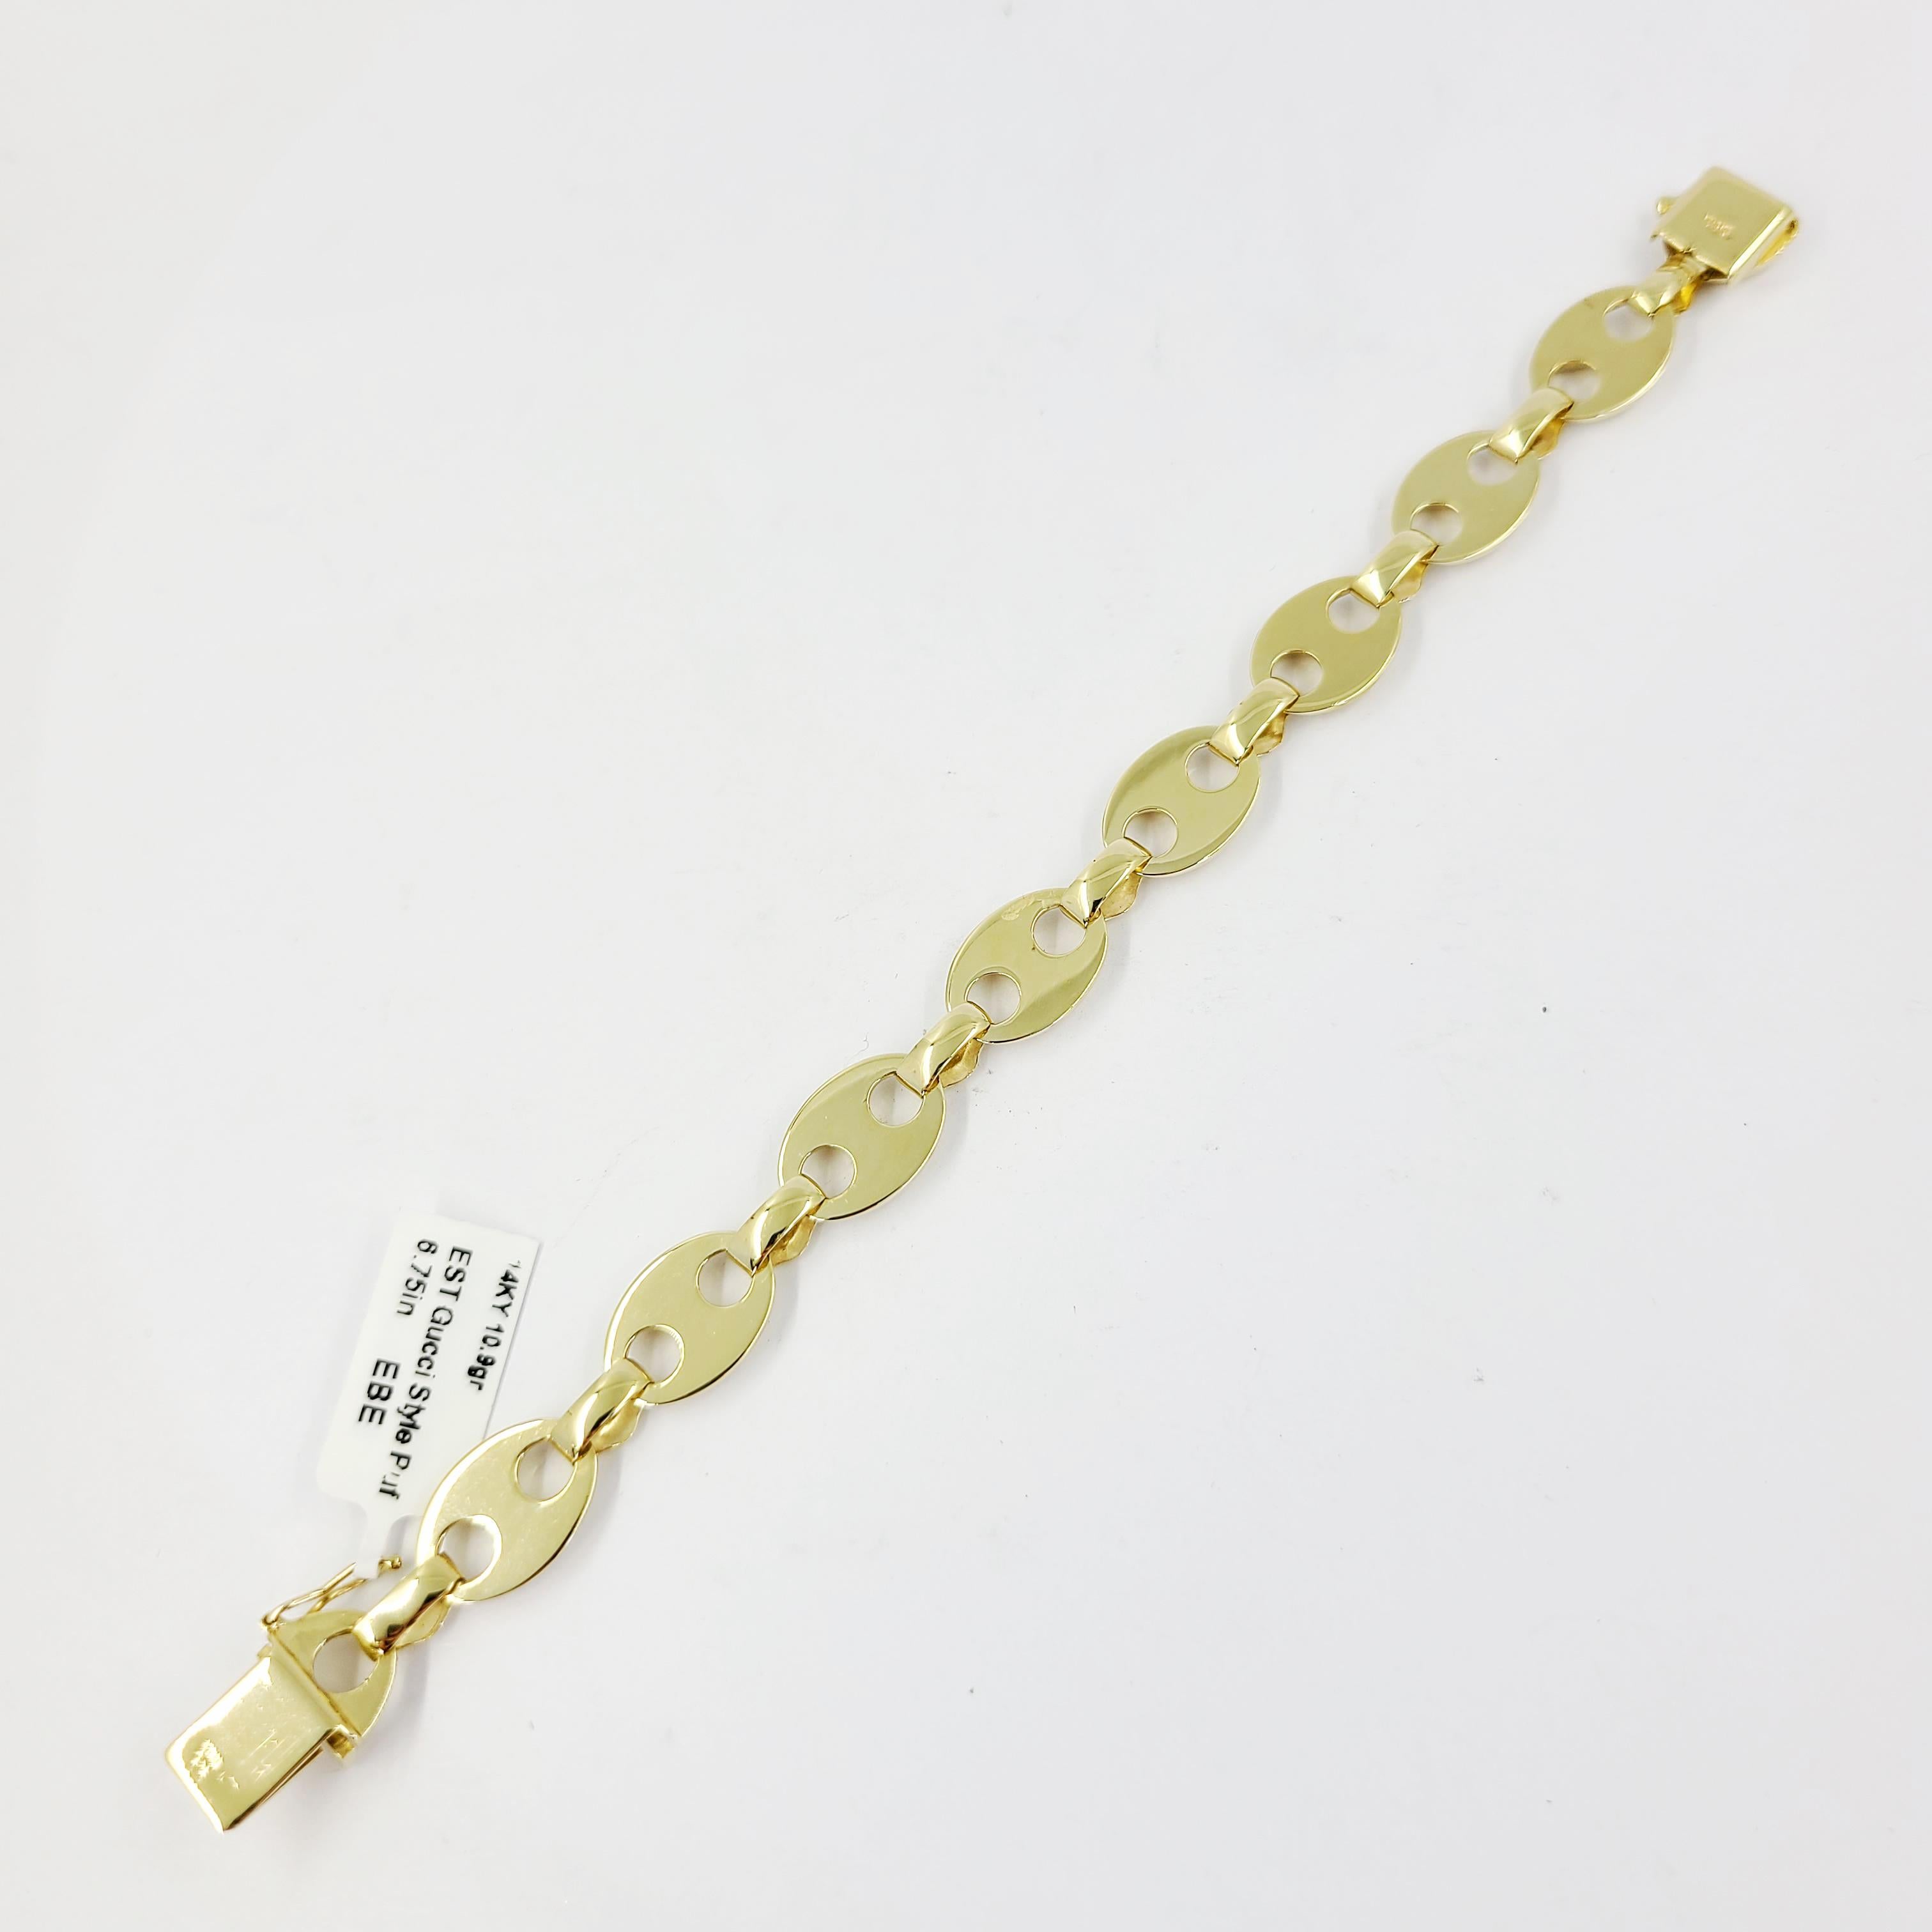 14 Karat Yellow Gold Gucci Style Puff Link Bracelet With Hidden Box Clasp. 6.75 Inches Long. Finished Weight 10.9 Grams.